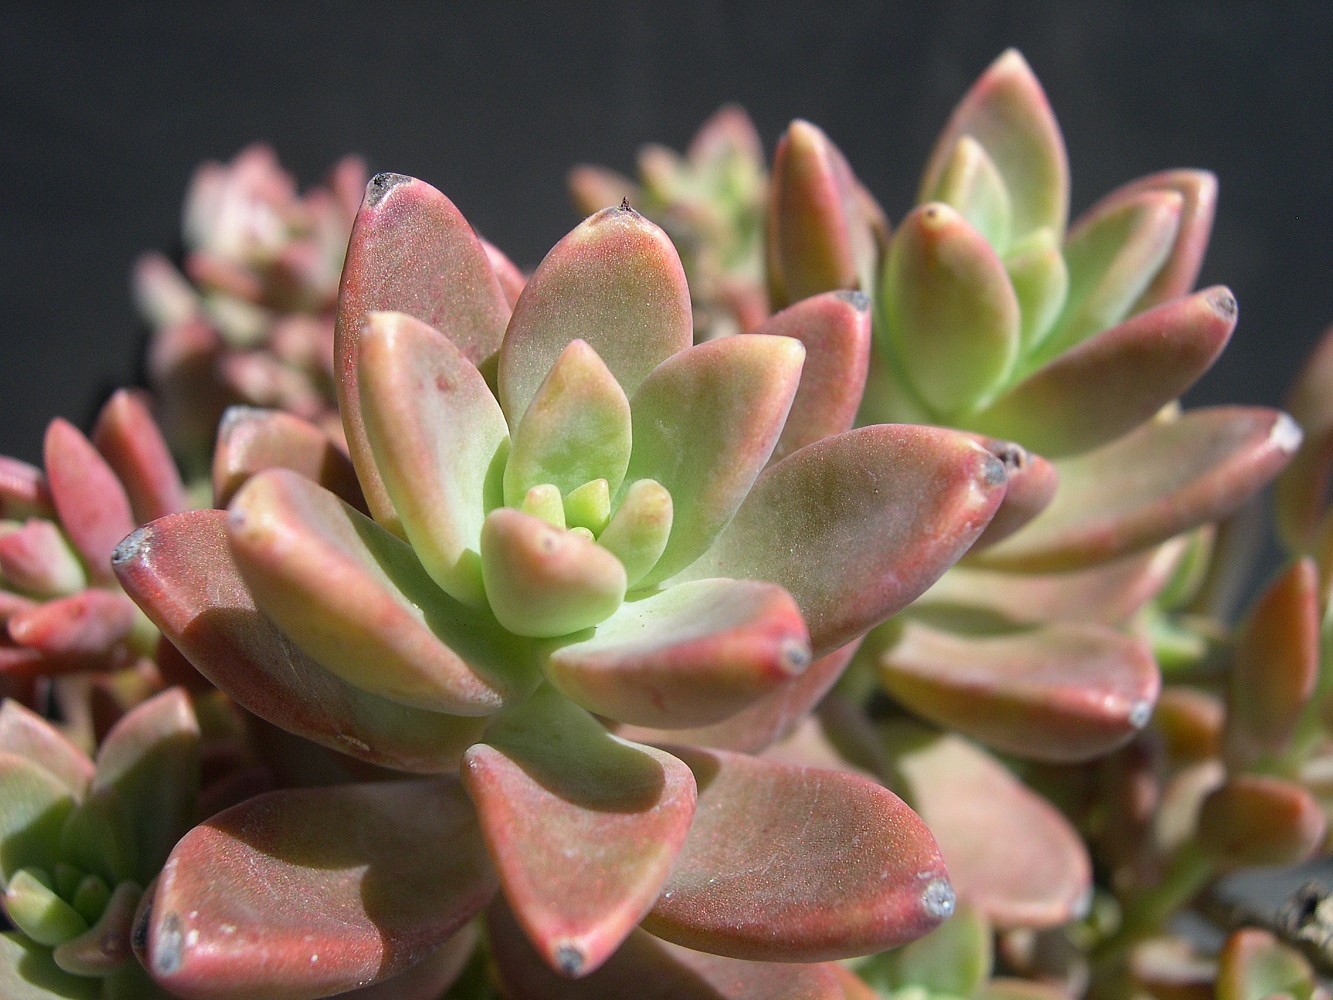 13 Best Indoor Succulents to Grow Now! Alpenglow Vera Higgins Succulent #Succulents #Garden #Gardening #HousePlants #Decor #HomeDecor #GrowYourOwn #Affordable #DIY #BudgetFriendly